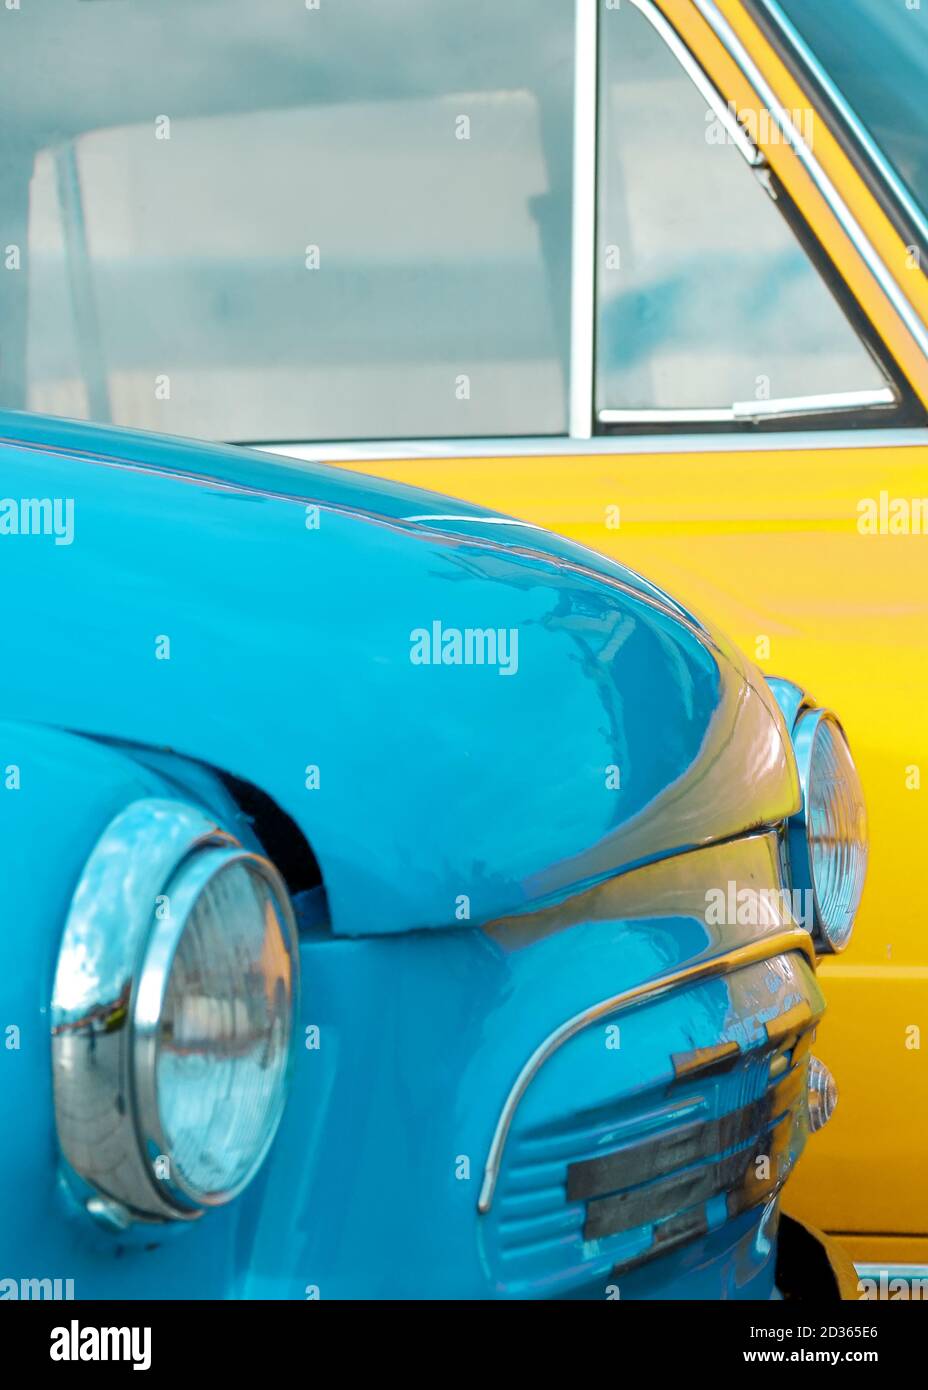 Headlights of a blue vintage car on the background of a yellow car close-up Stock Photo